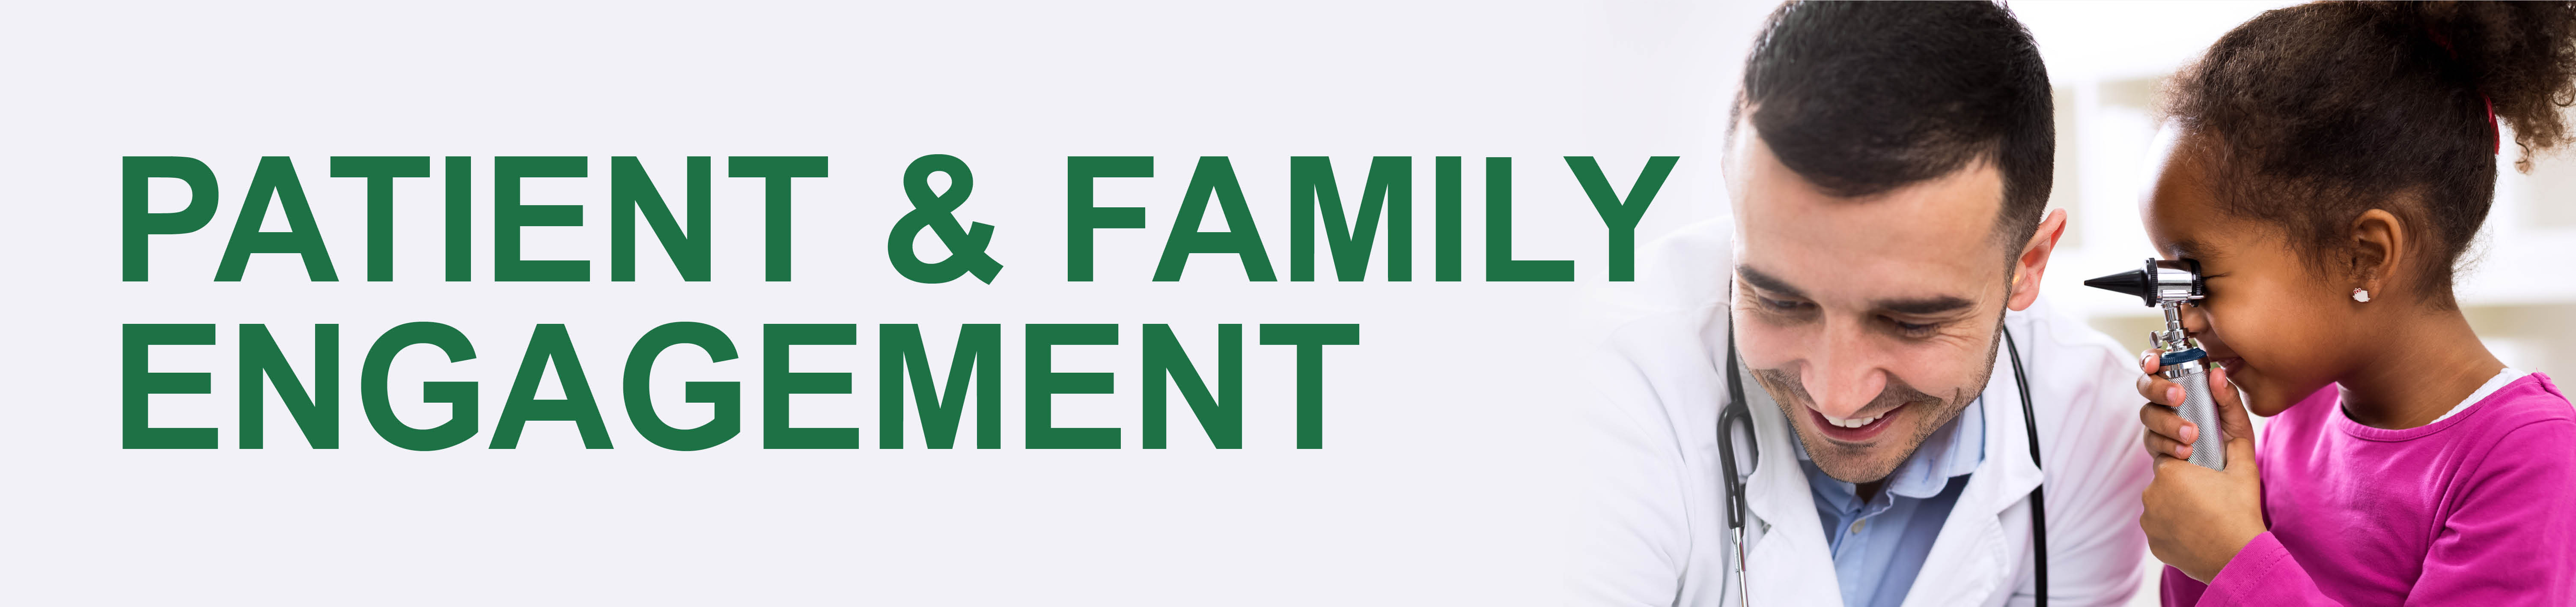 PFE: Patient and Family Engagement